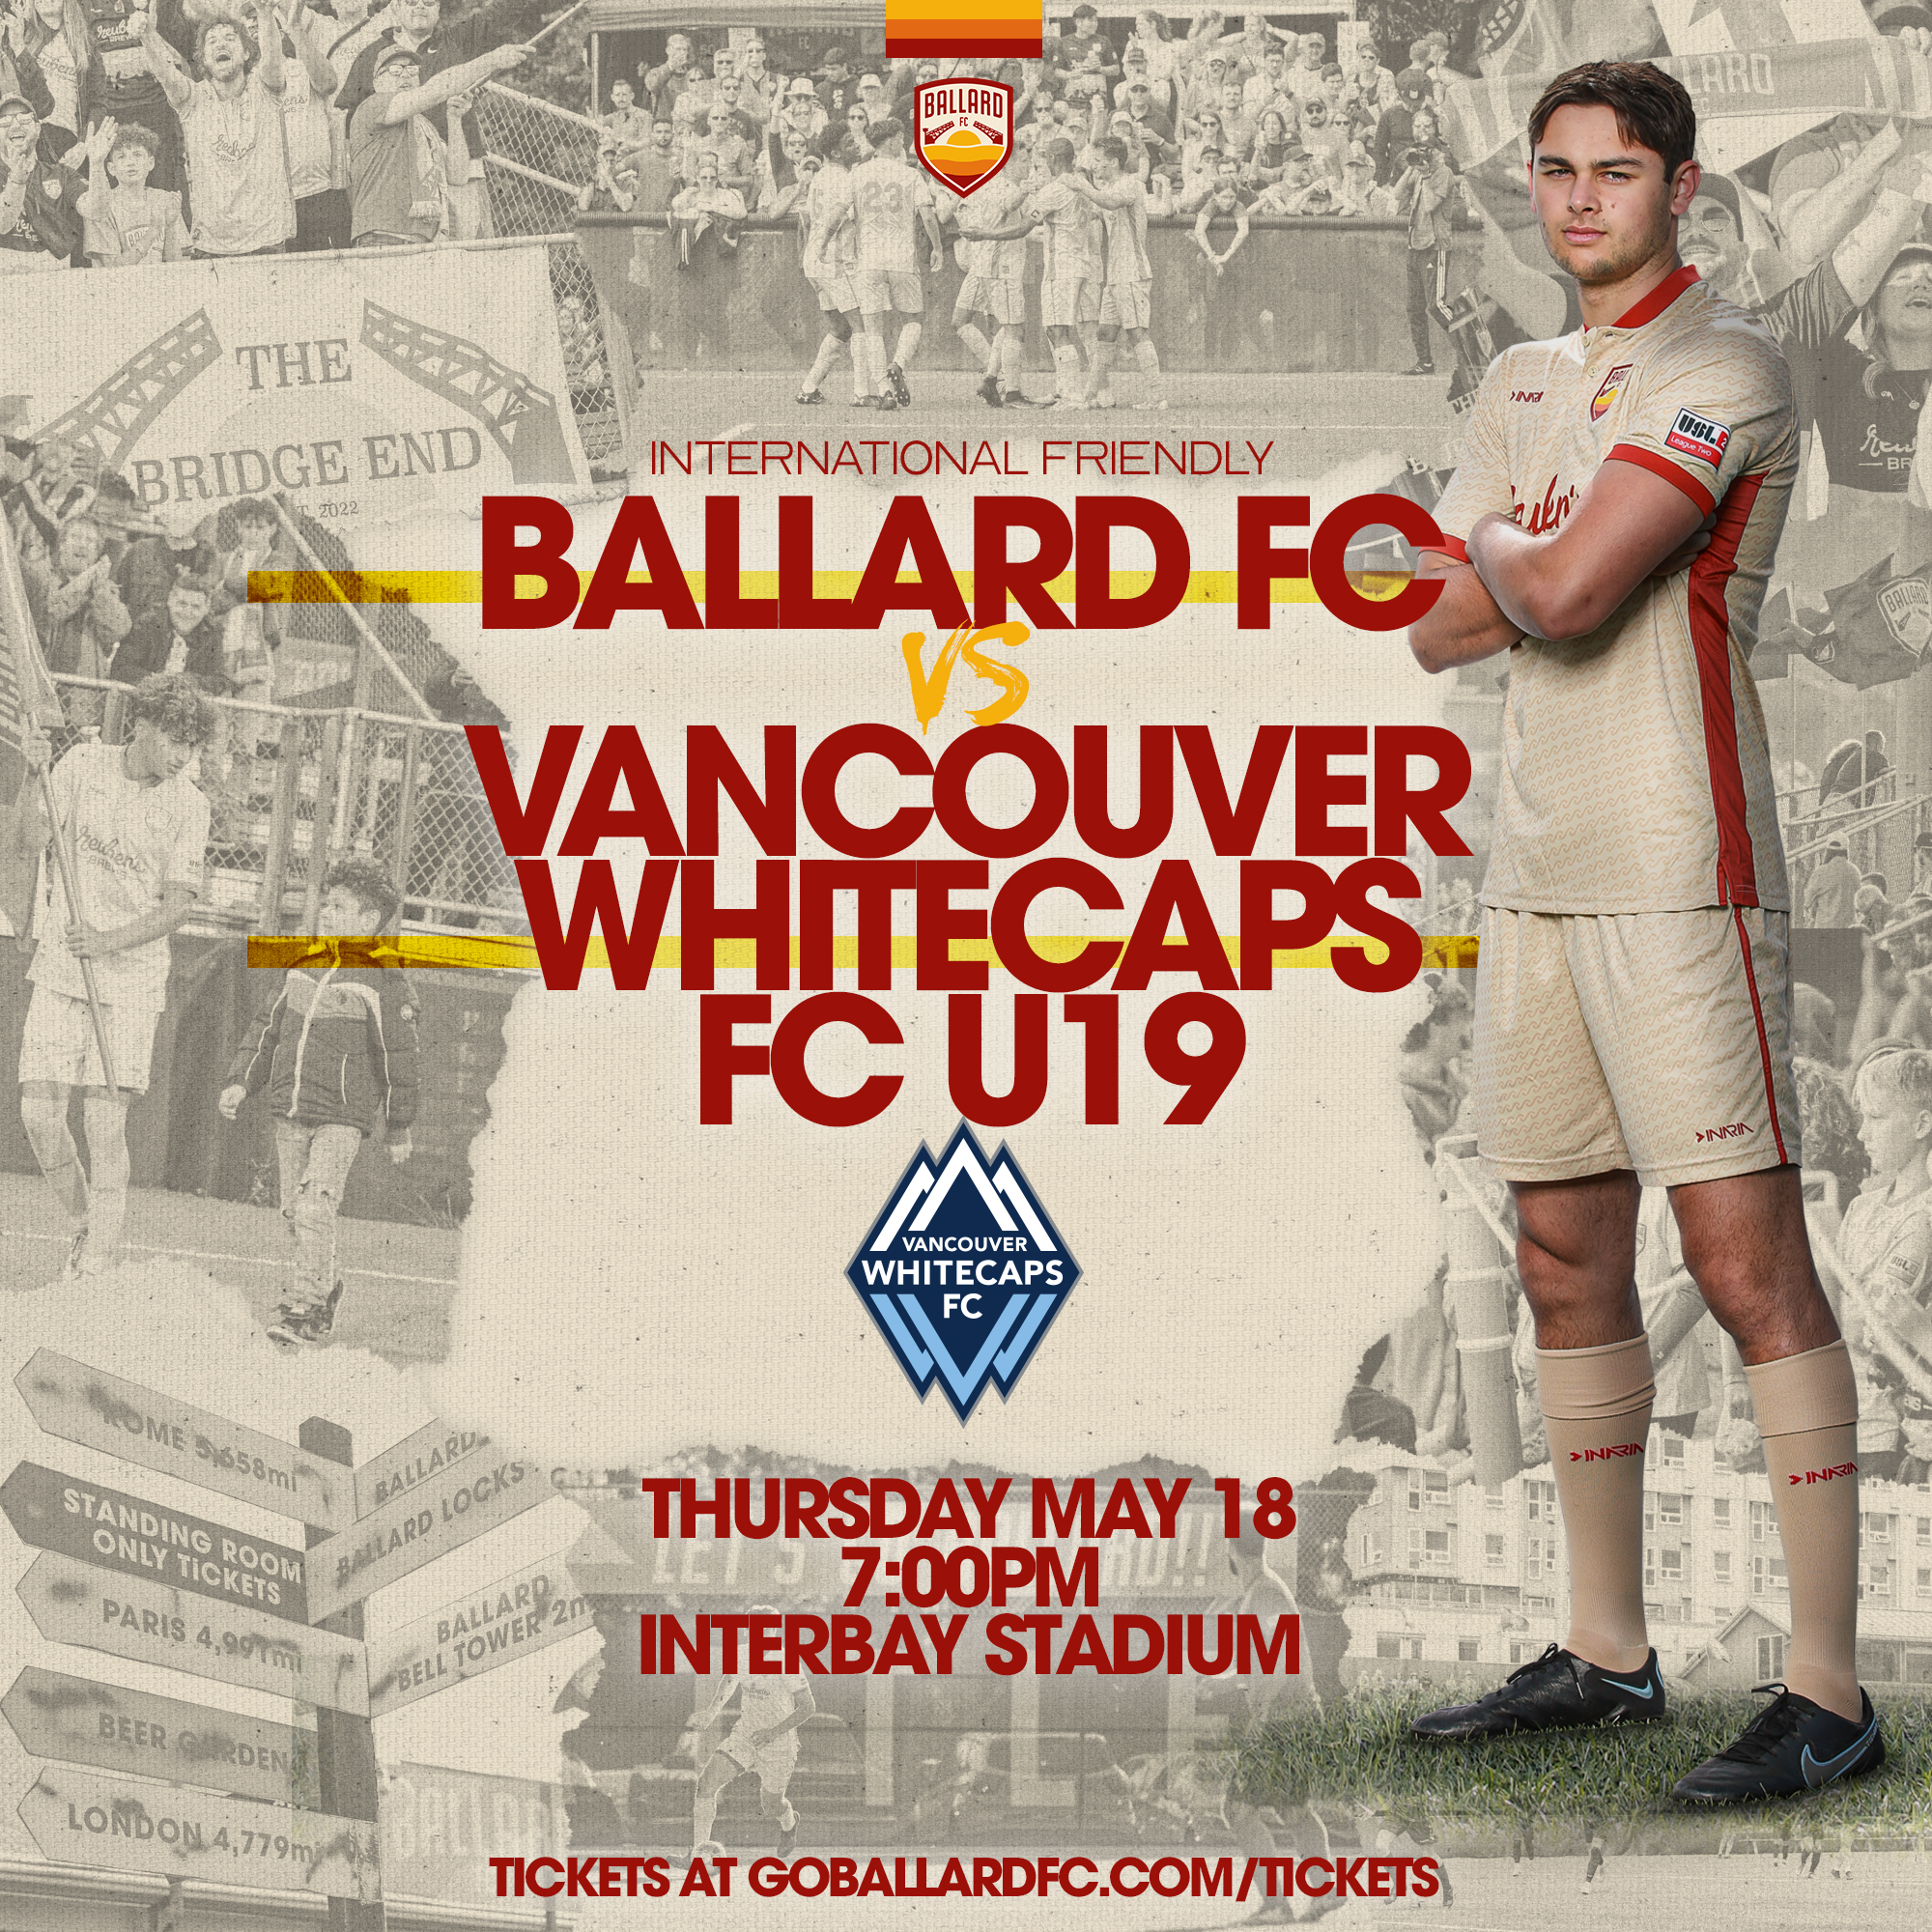 INTERNATIONAL FRIENDLY: Ballard FC to play Vancouver Whitecaps FC U19 in pre-season friendly on May 18th featured image